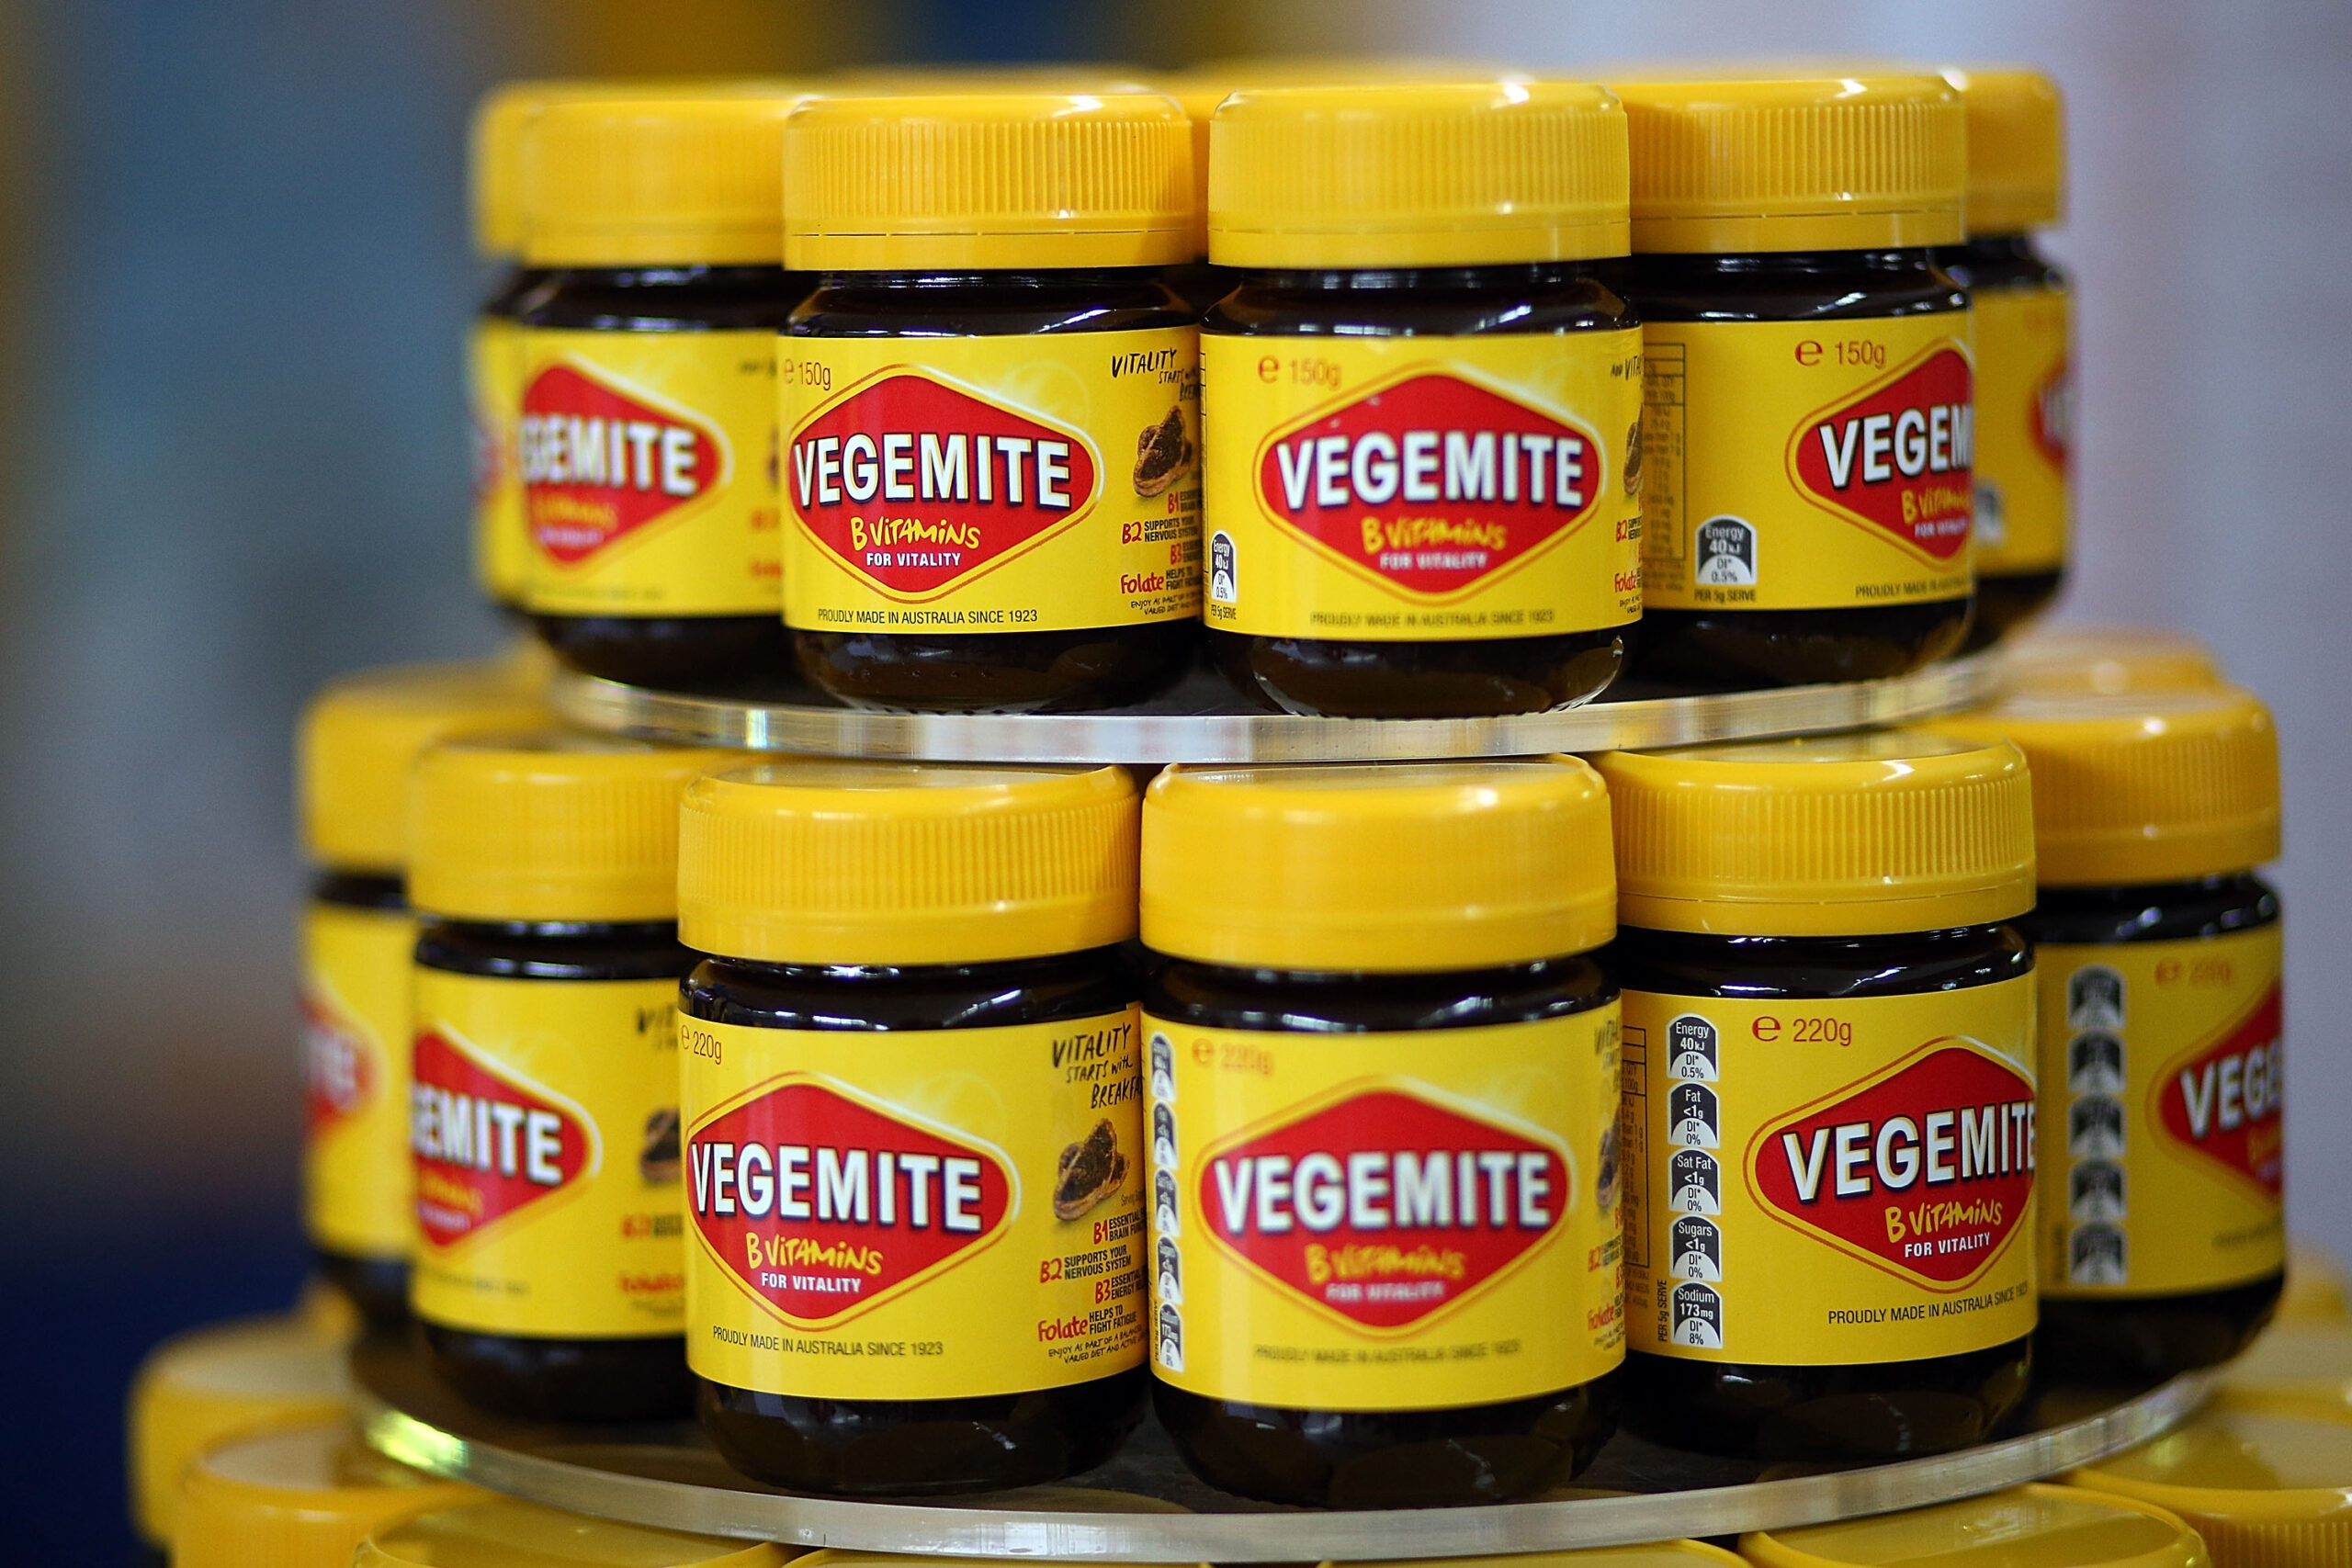 Tray of Vegemite containers